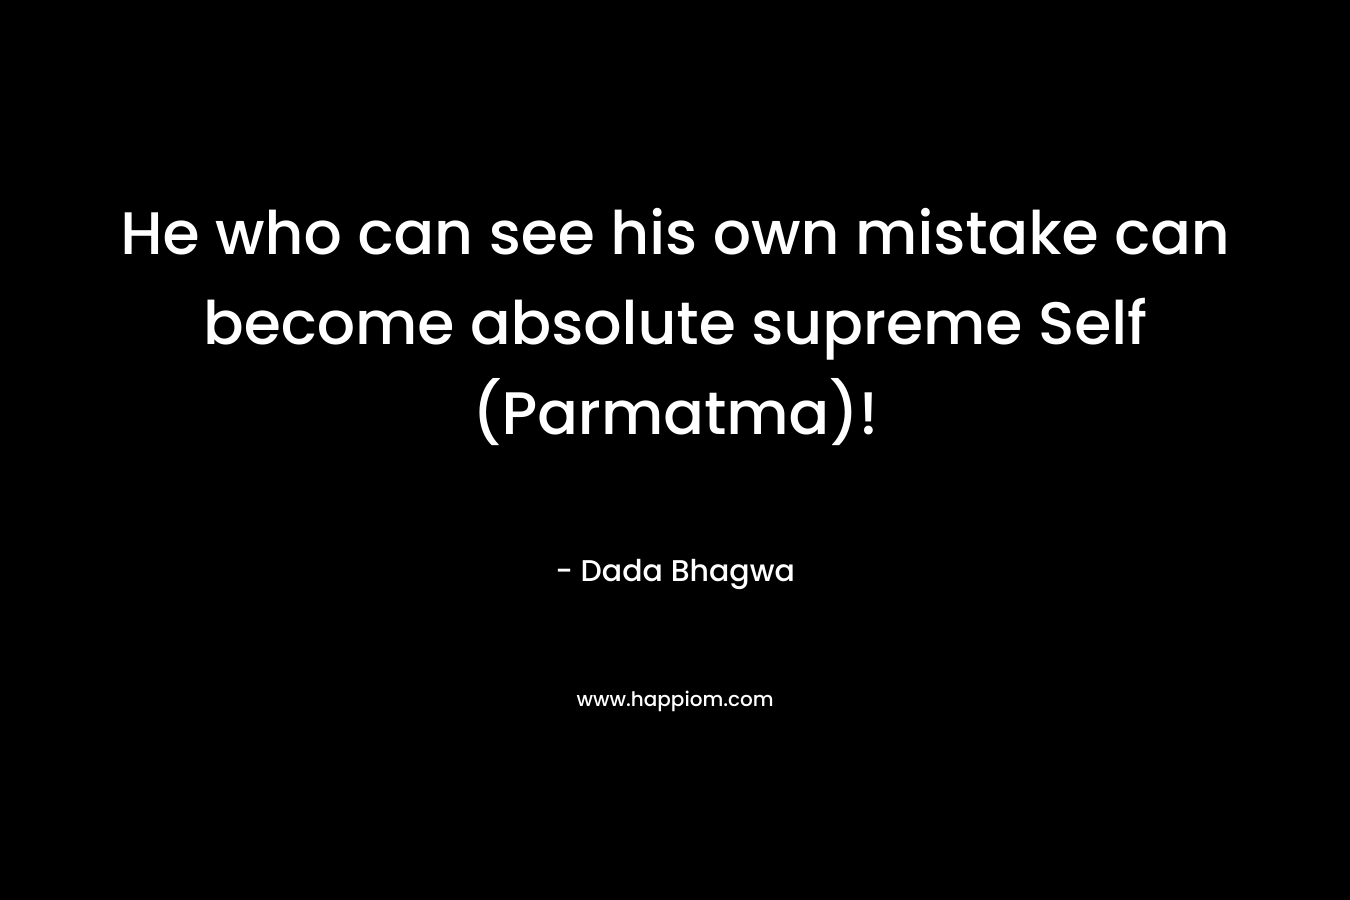 He who can see his own mistake can become absolute supreme Self (Parmatma)!